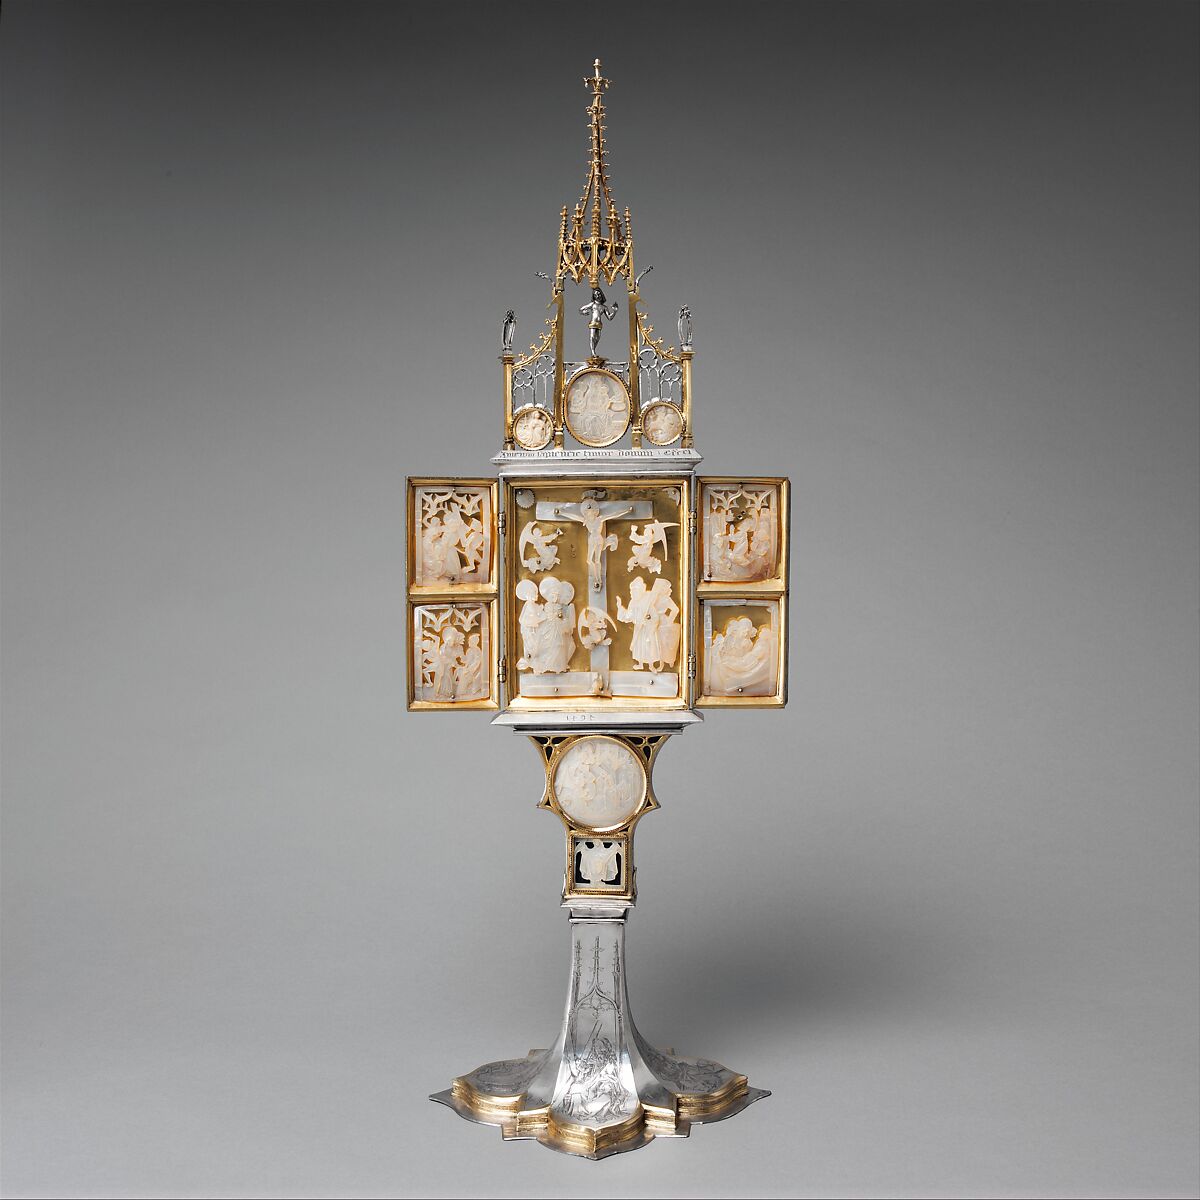 Triptych with Scenes from the Passion of Christ, Master Pertoldus (Berthold Schauer?), Silver, gilded silver, mother-of-pearl, bone, and cold enamel, Austrian